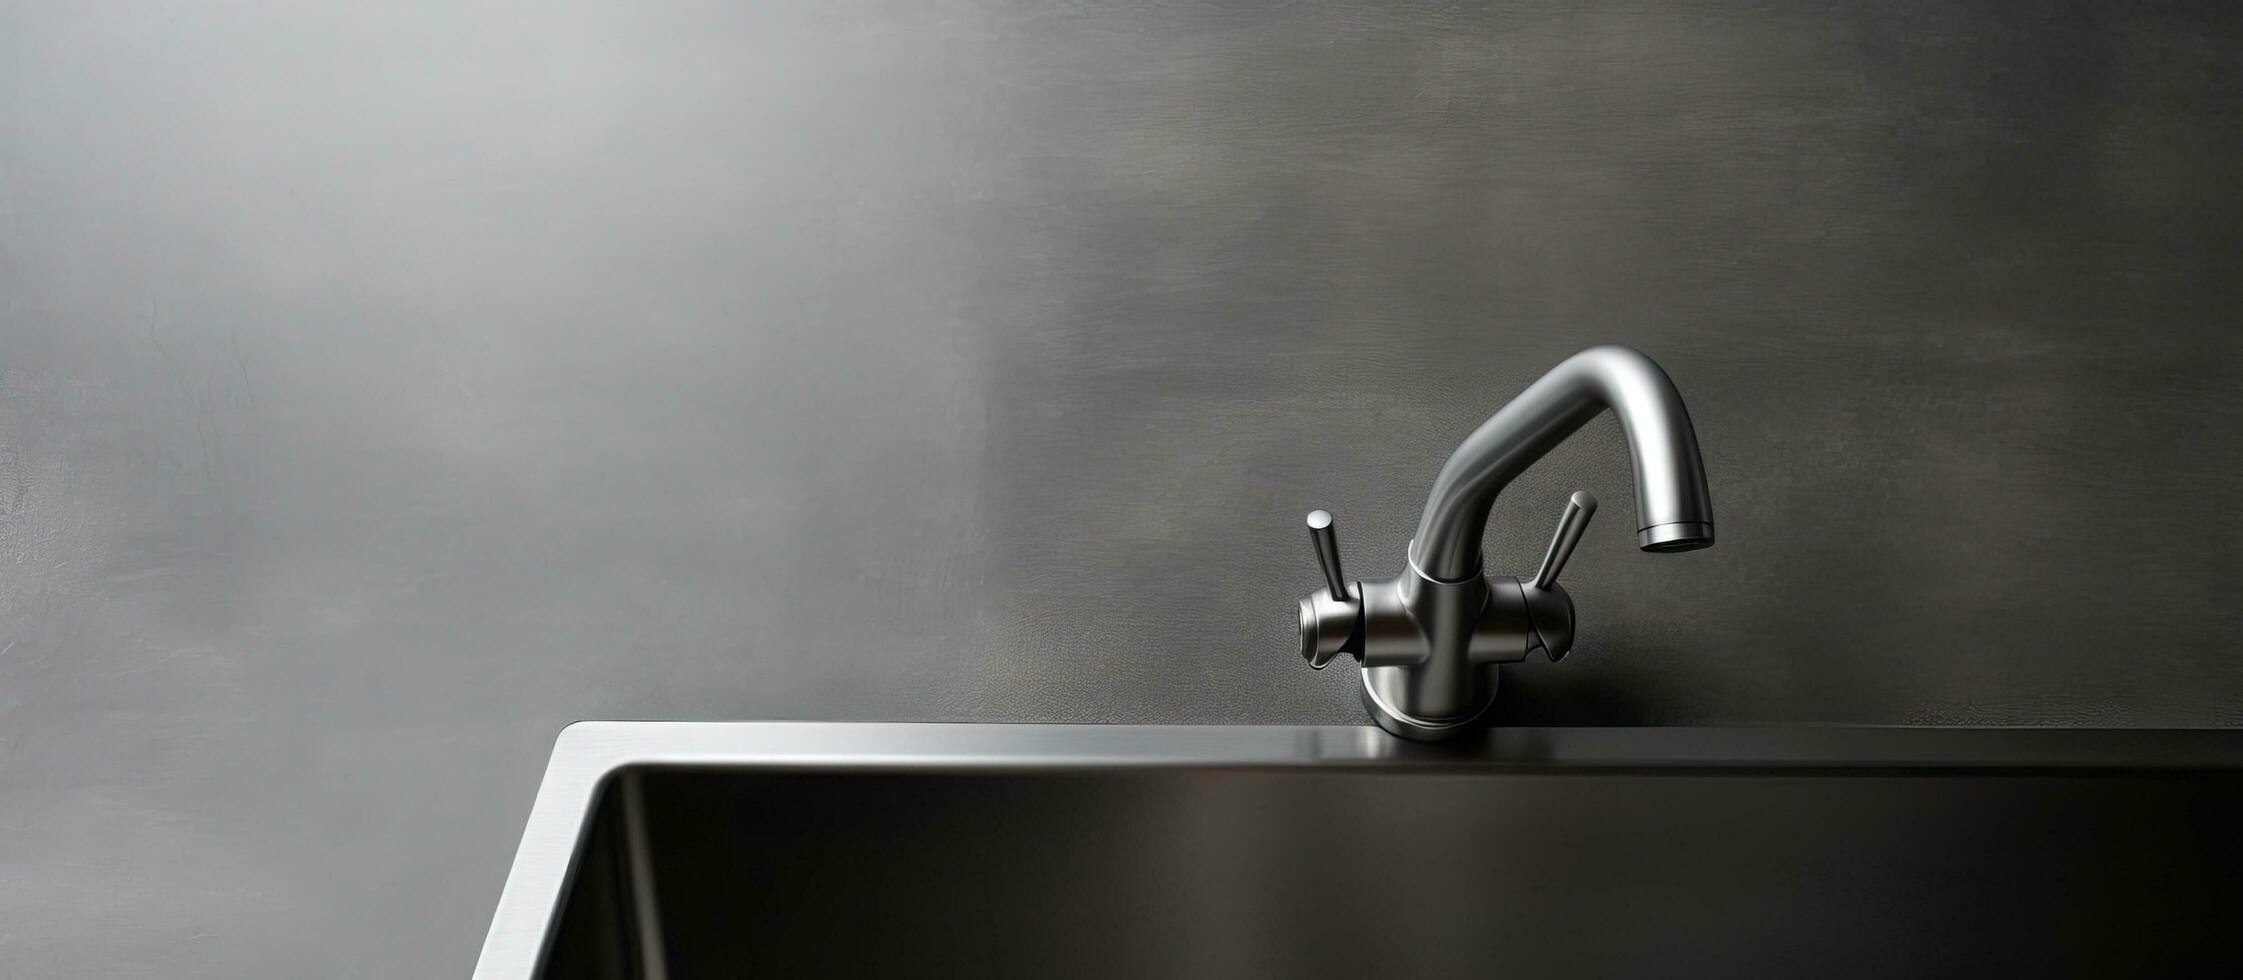 Photo of a modern kitchen sink with a sleek faucet and plenty of space for food preparation and dishwashing with copy space